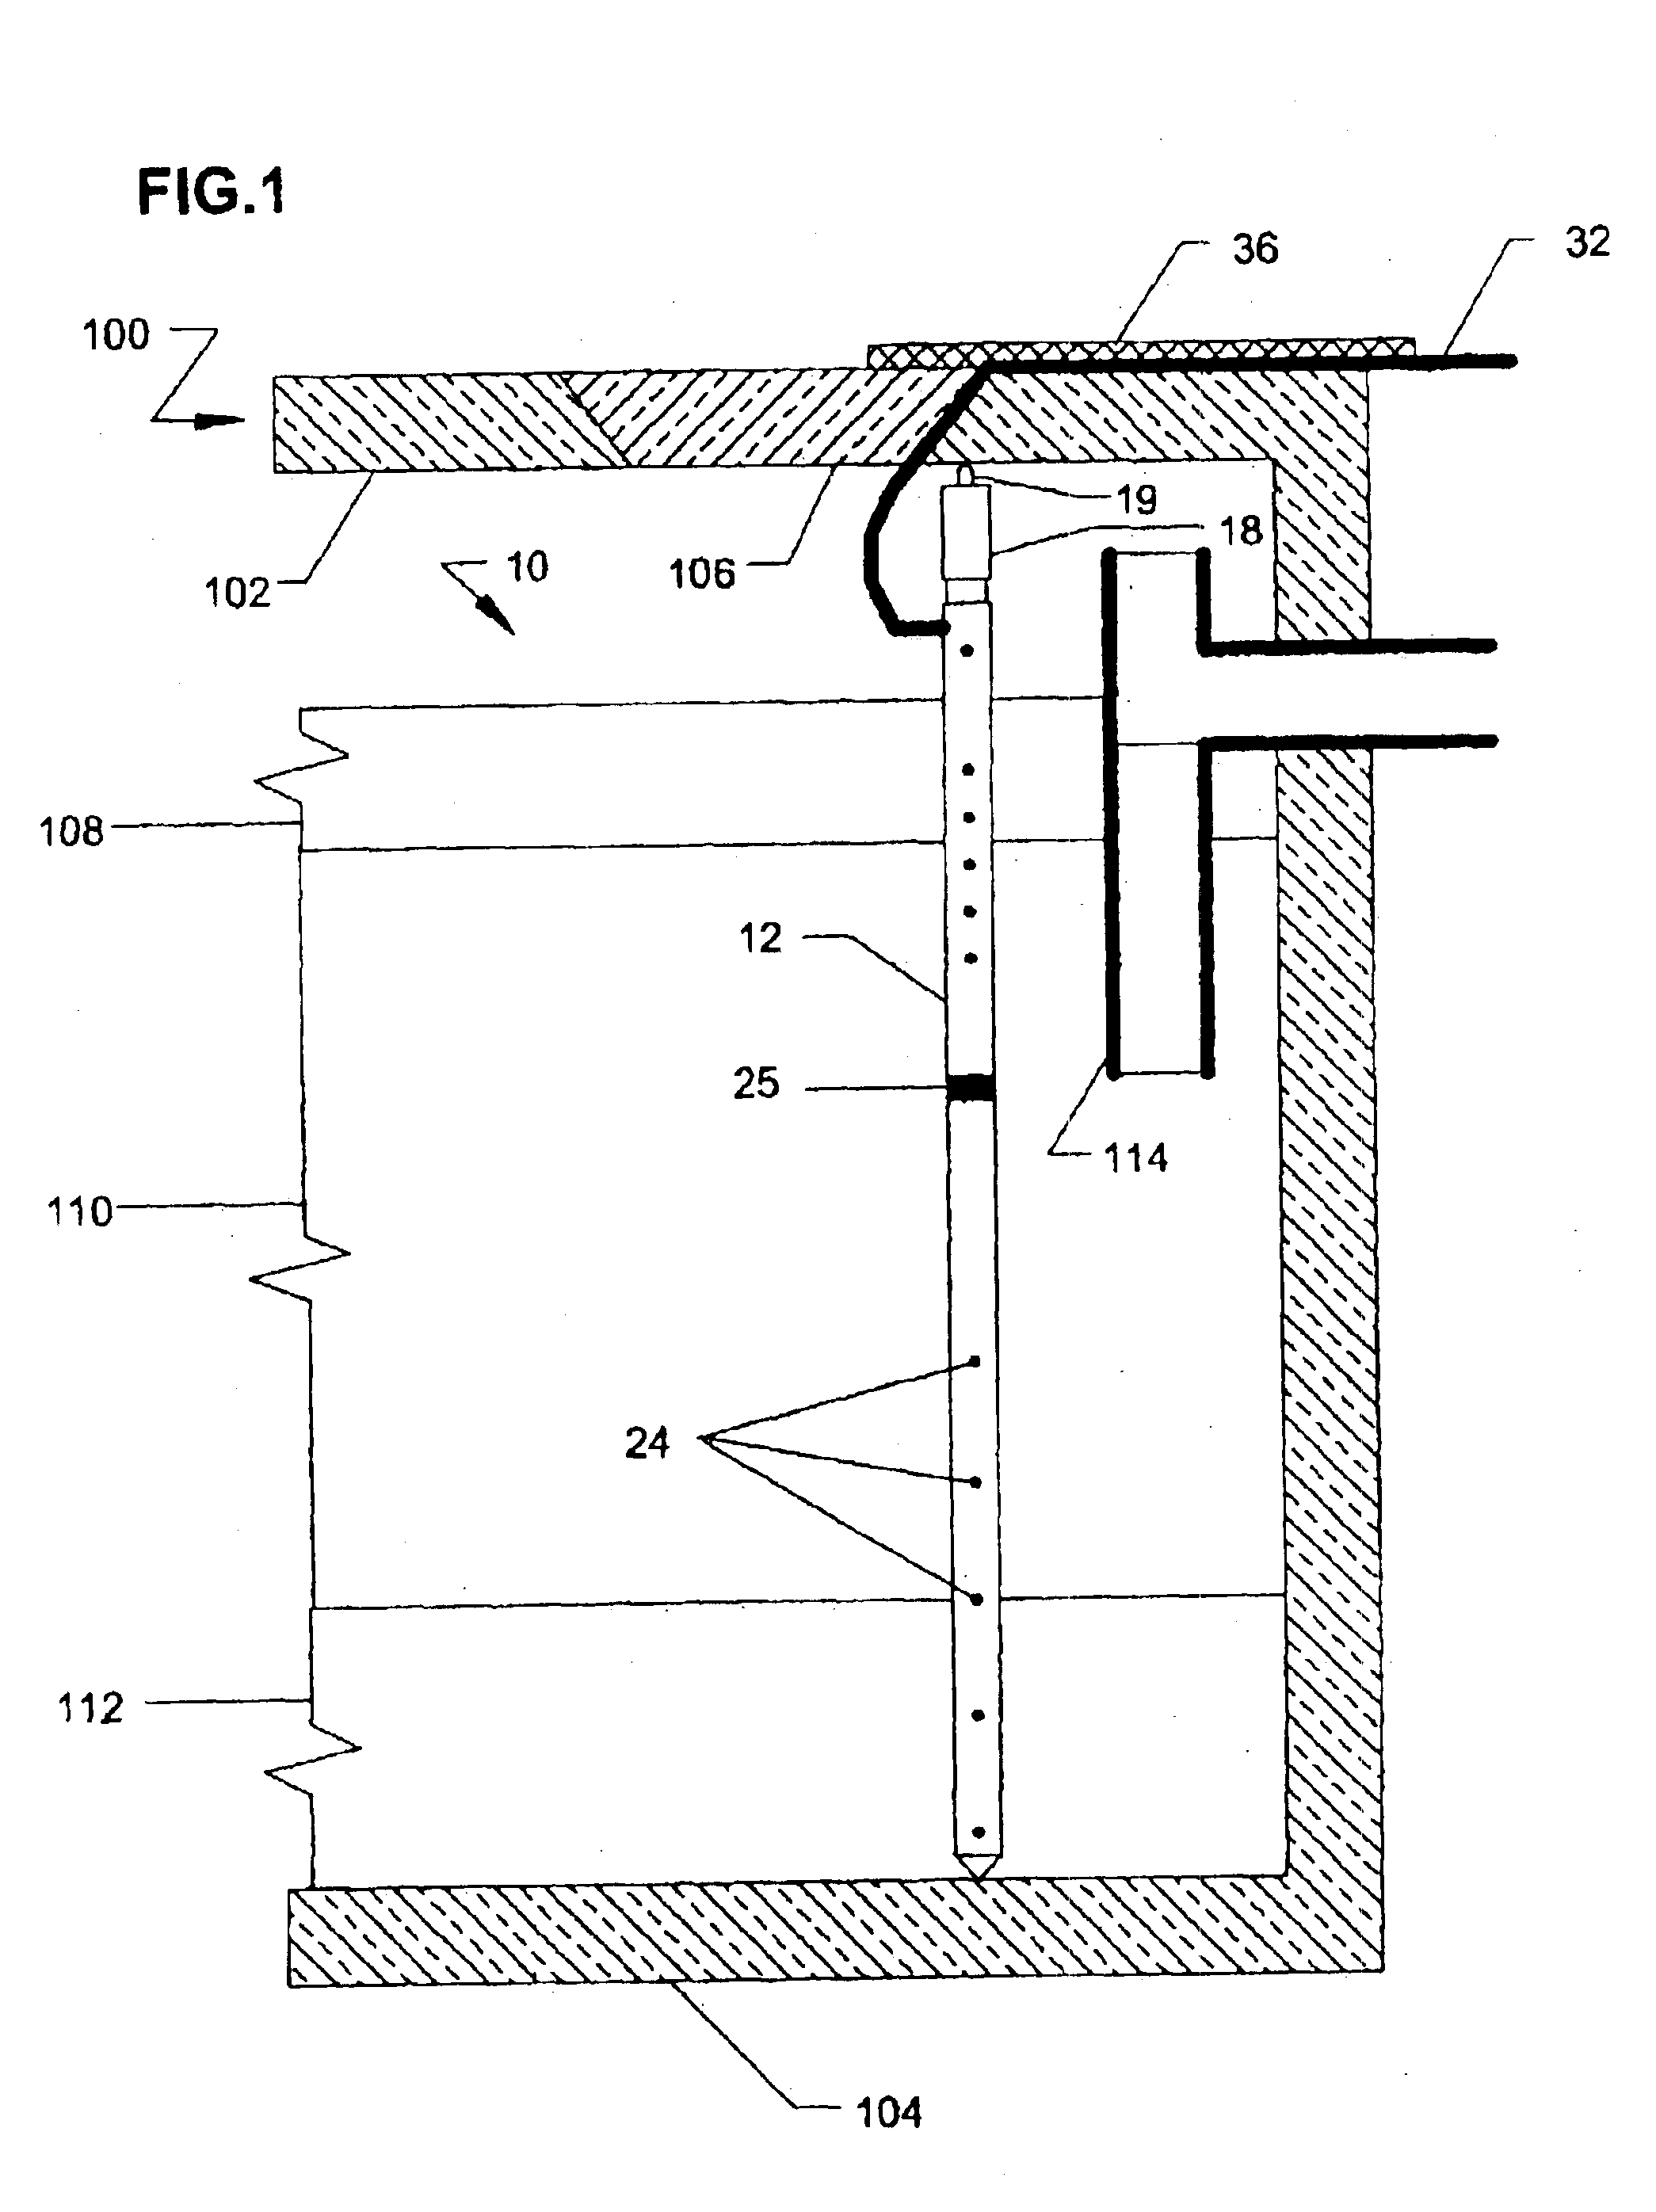 Monitoring system with thermal probe for detection of layers in stratified media